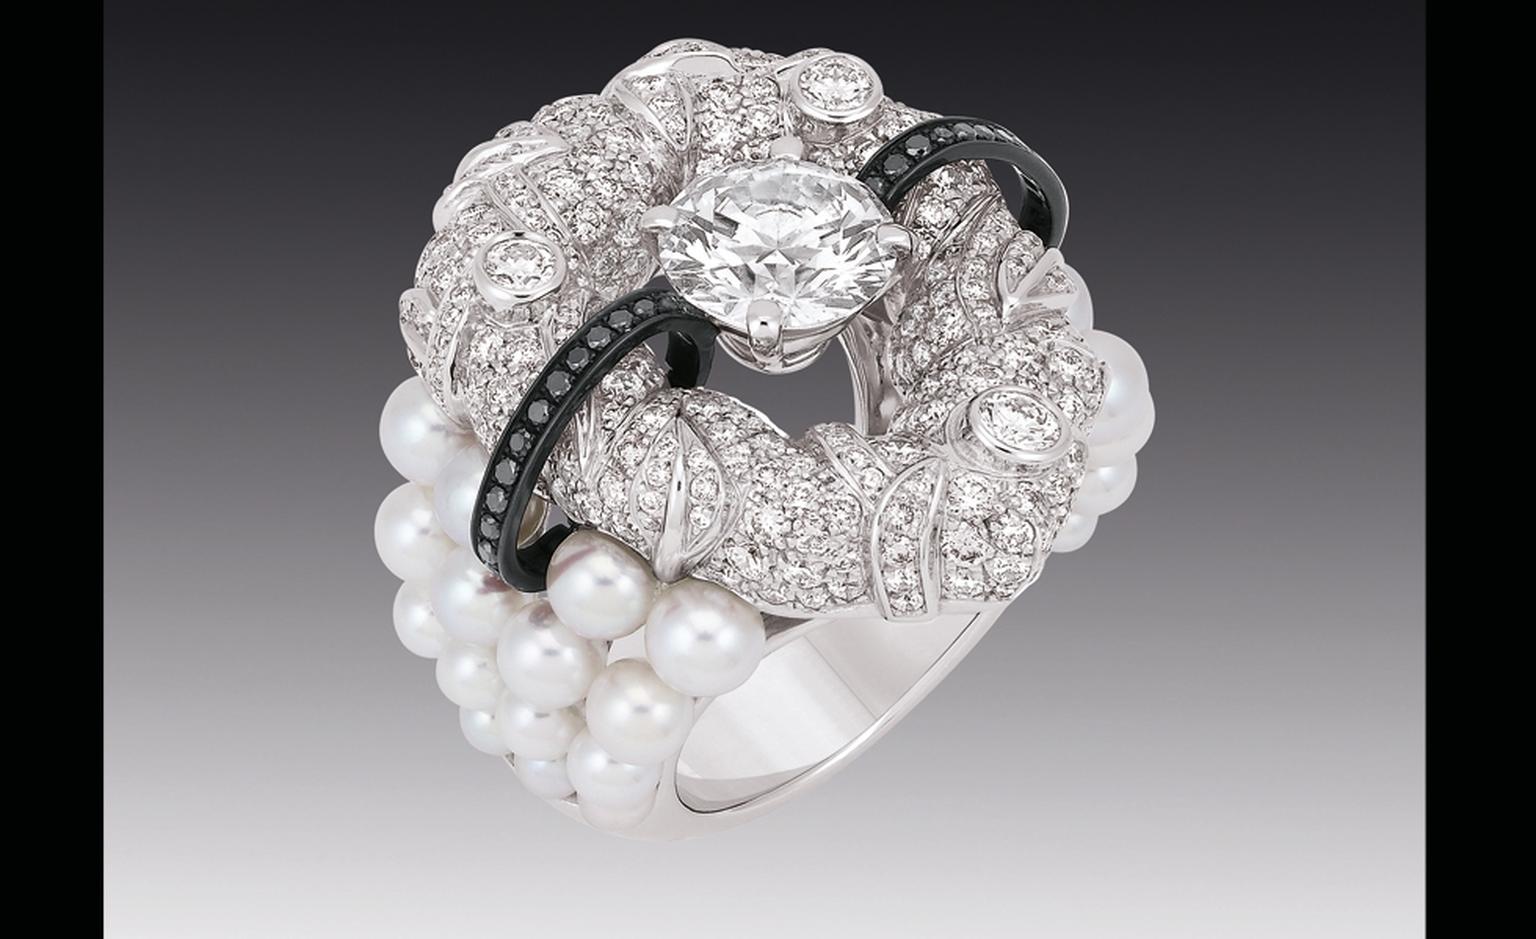 Chanel Contrastes collection: Bague Nuage de Glace. Ring in white gold, pearls and diamonds.